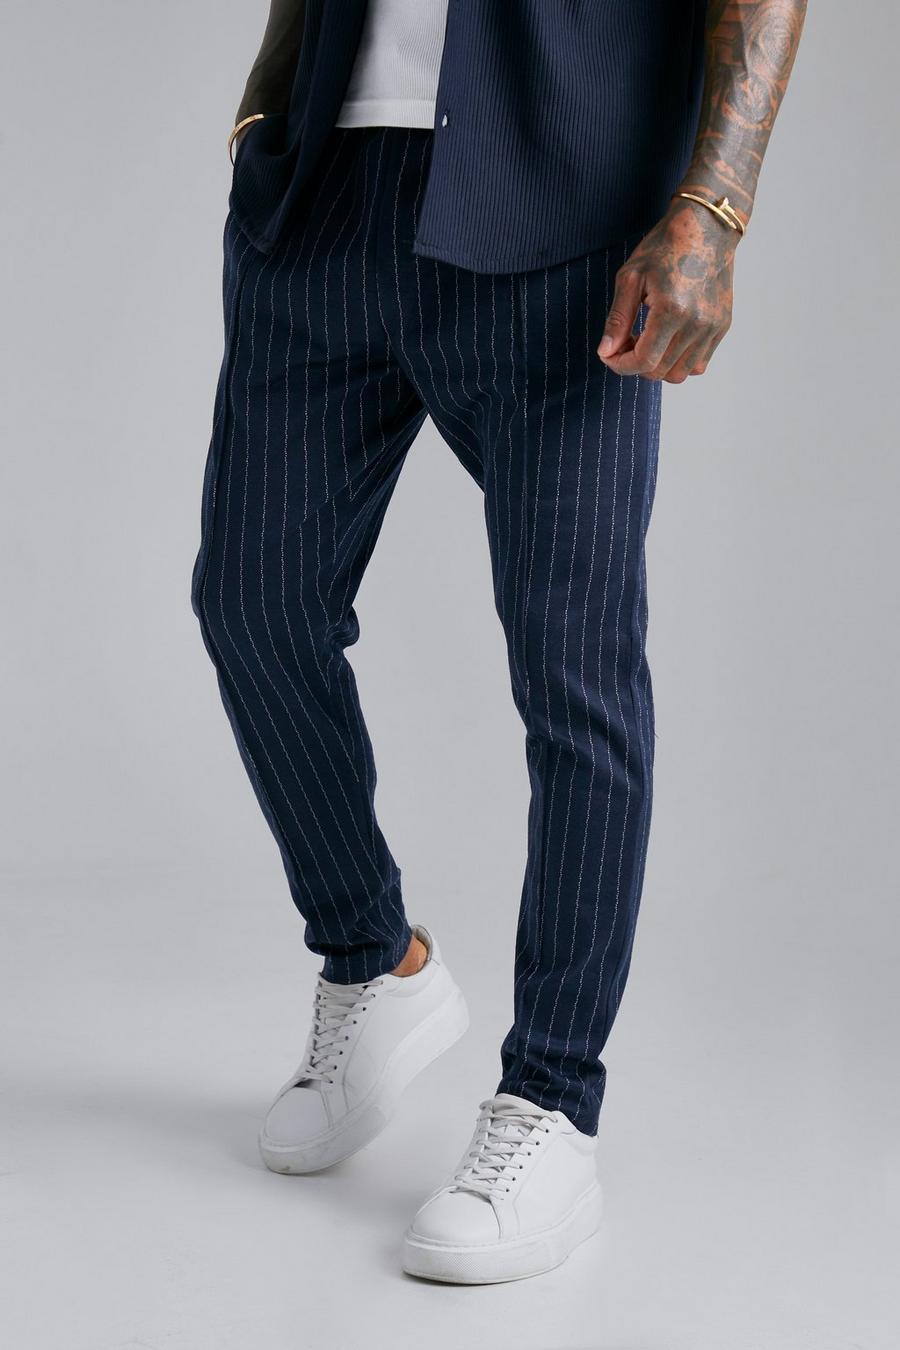 Pantaloni tuta Skinny Fit in jacquard a righe verticali con nervature, Navy image number 1